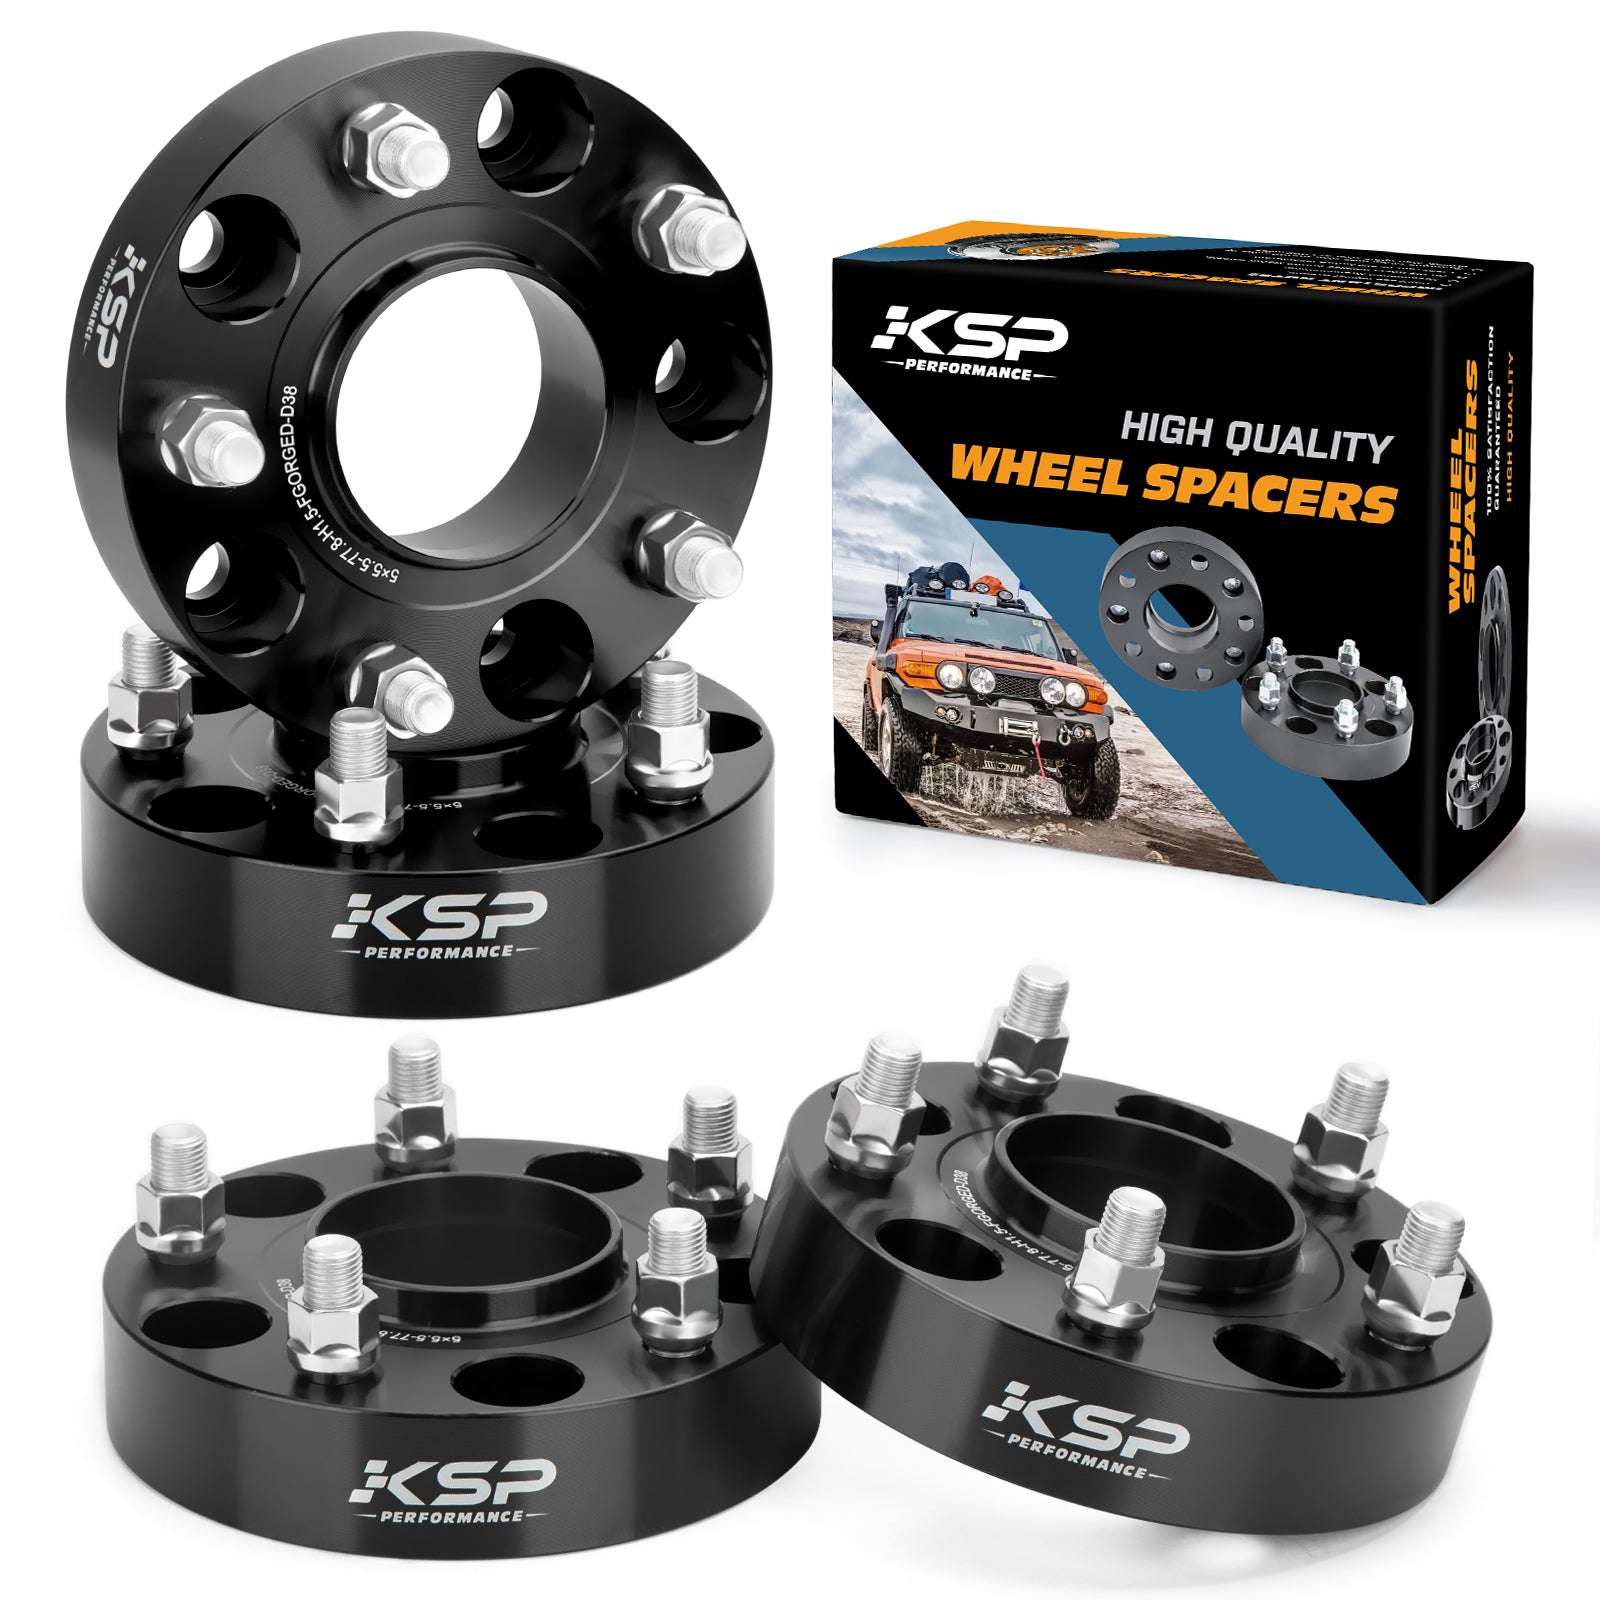 5x5.5 Wheel Spacers 1.5" For 2012-2018 Ram 1500 Pick Up Trucks(DS/DJ) xccscss.